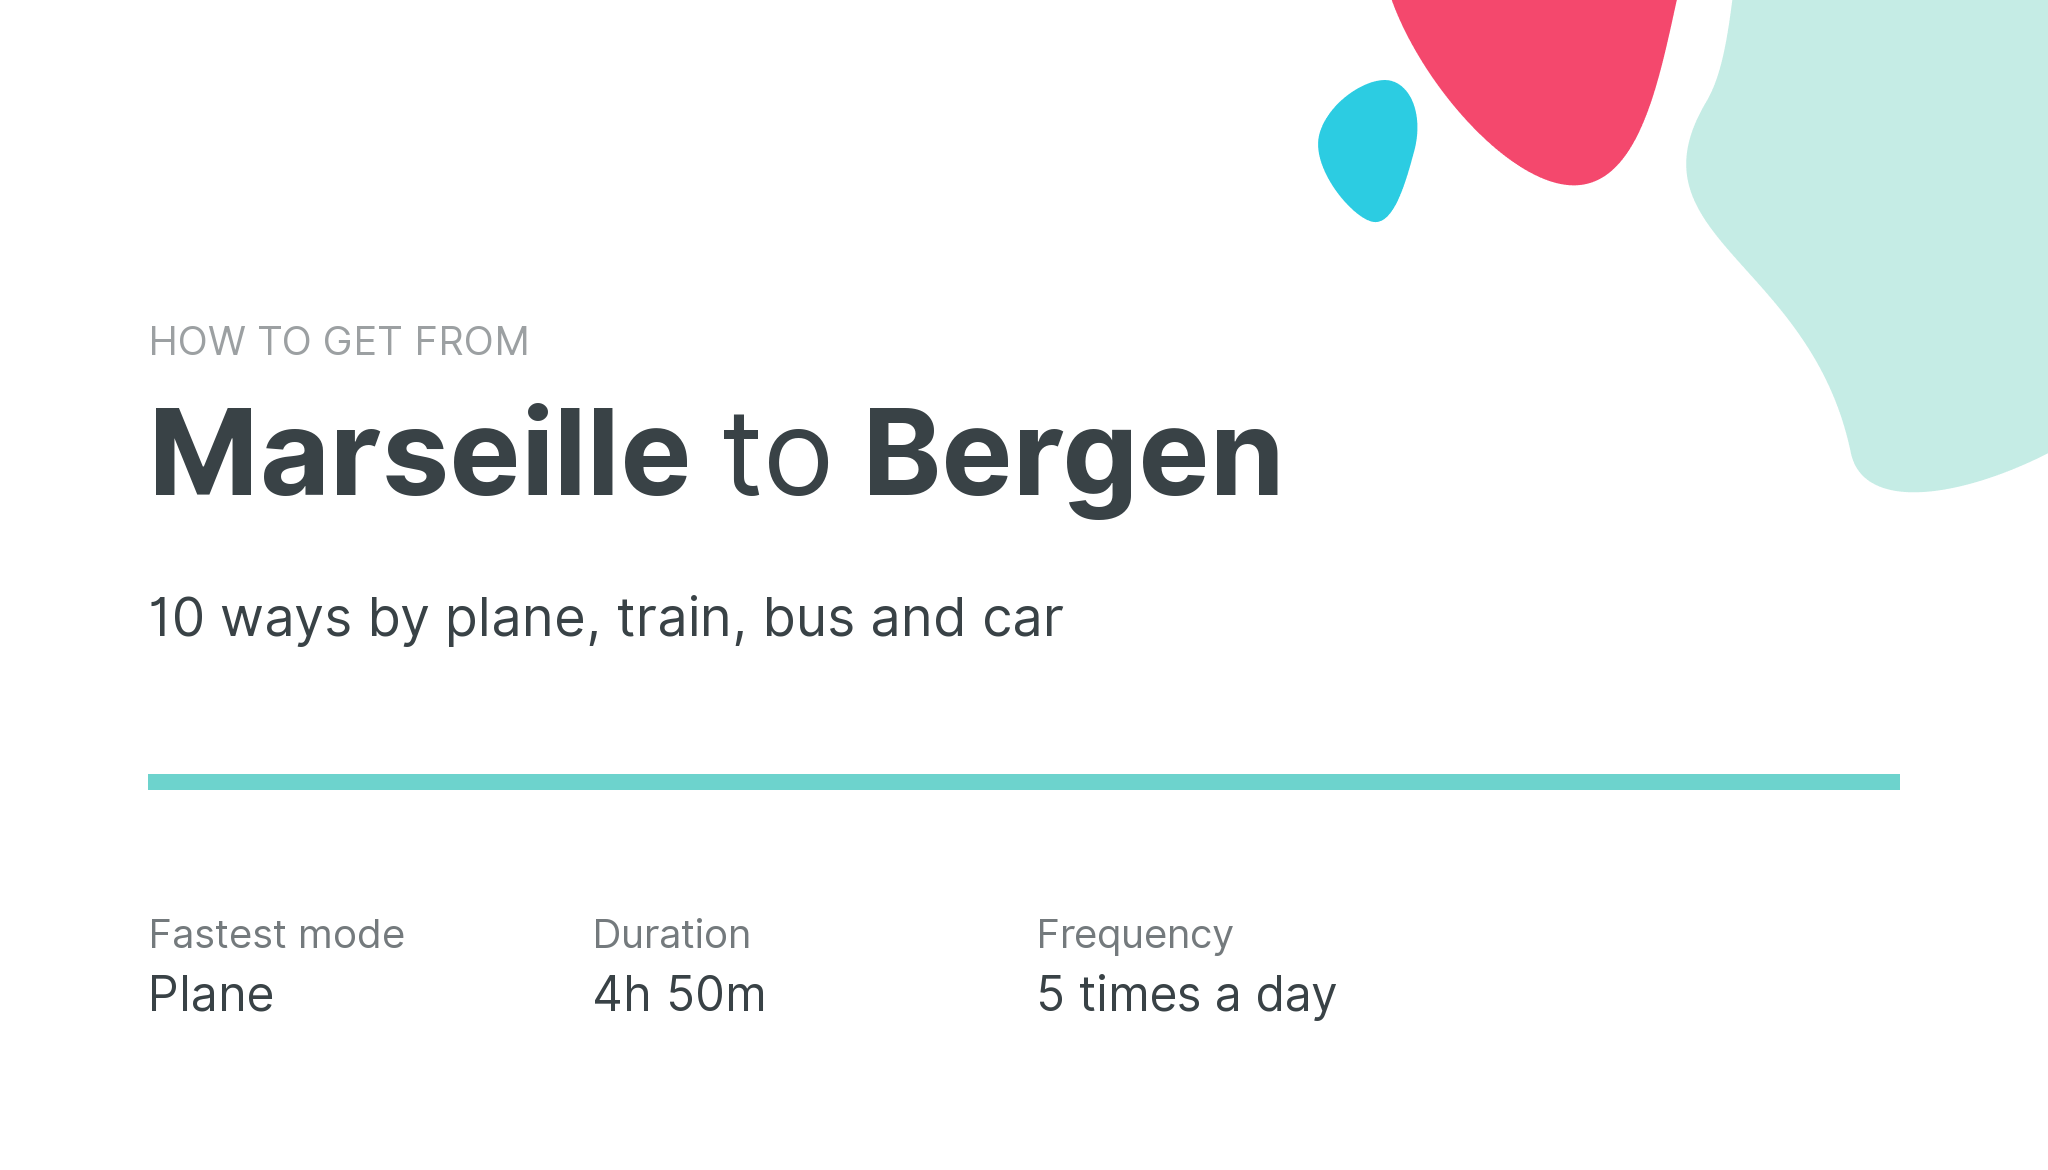 How do I get from Marseille to Bergen